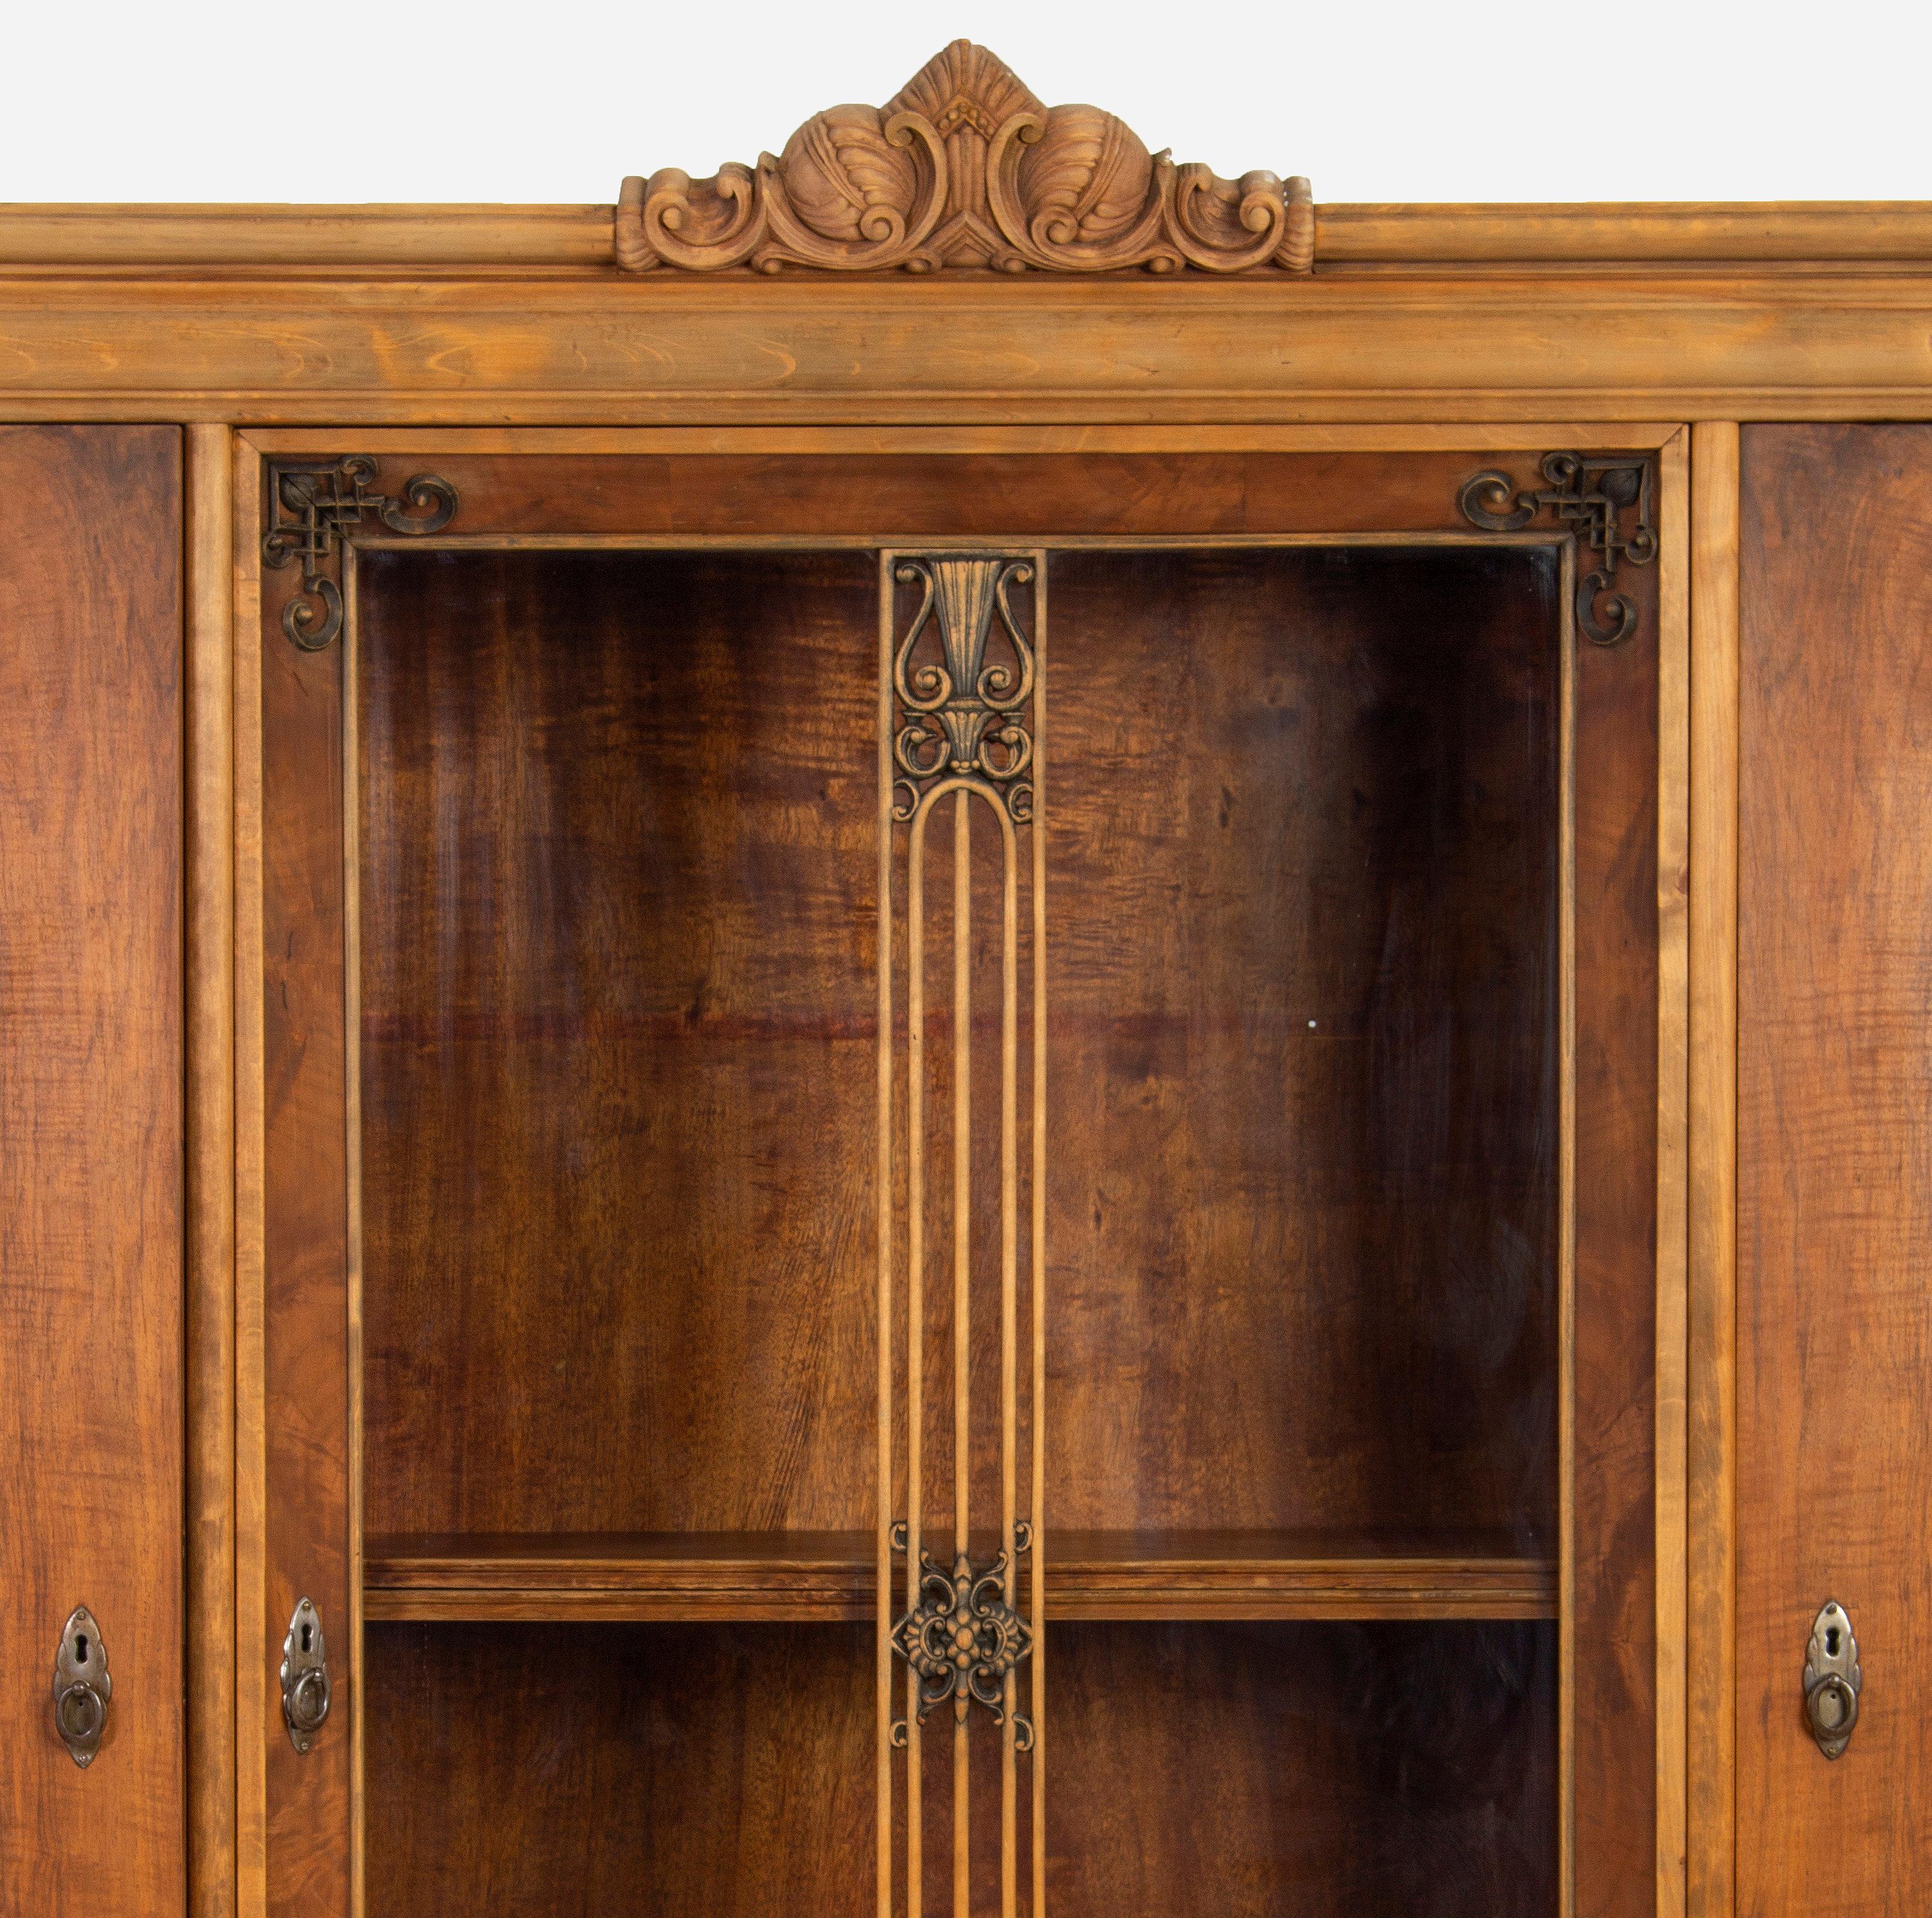 Early 20th Century Kozma Lajos Art Deco Bookcase with Carved Details, ca. 1900